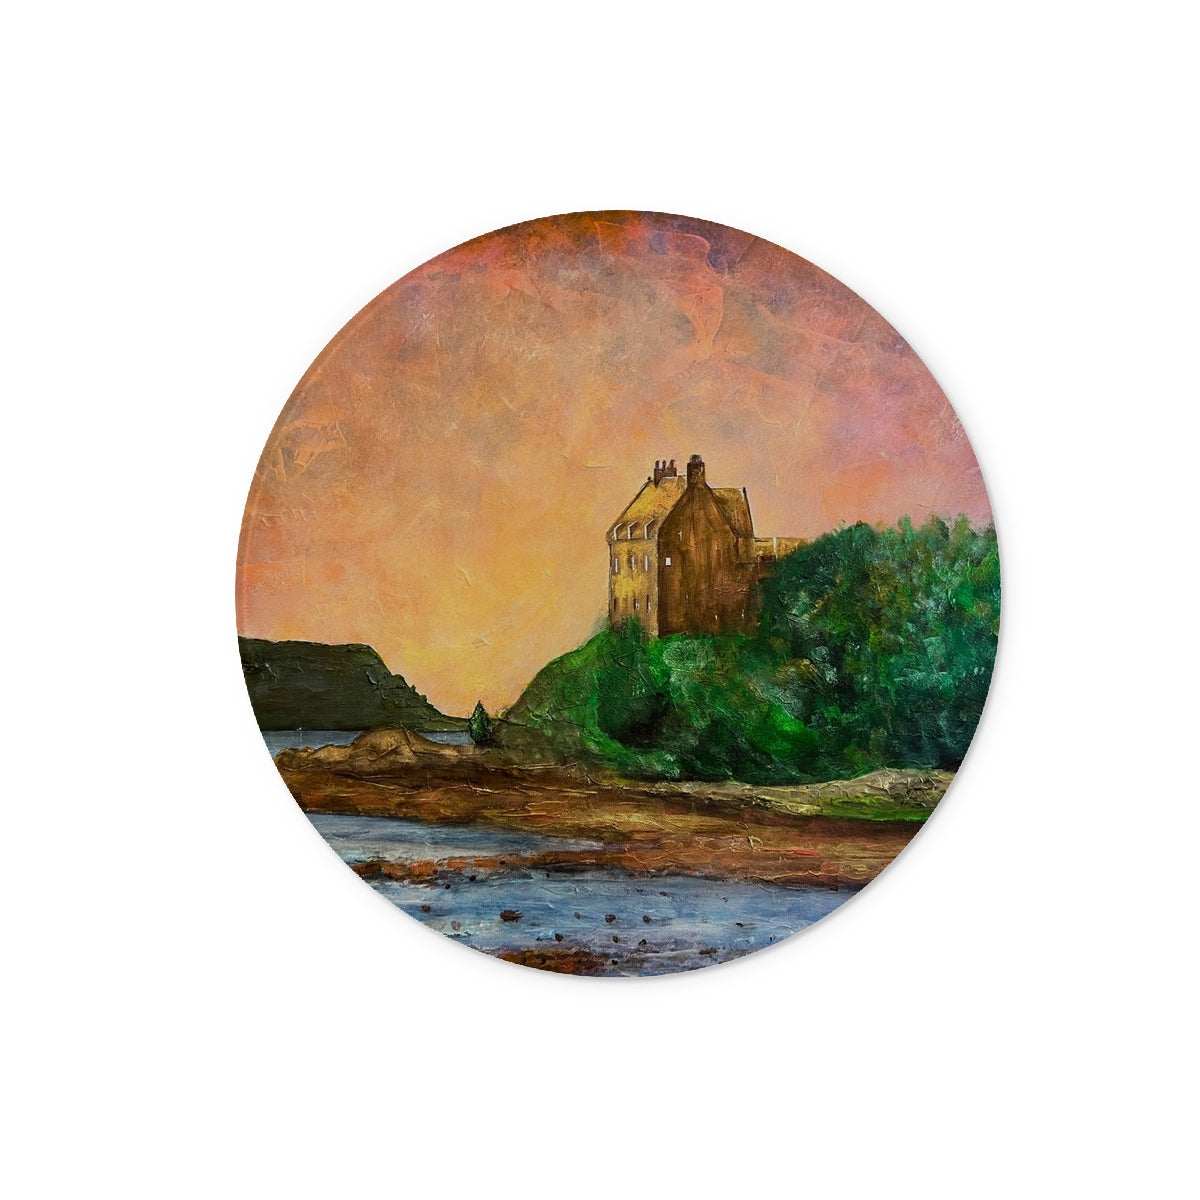 Duntrune Castle Art Gifts Glass Chopping Board-Glass Chopping Boards-Historic & Iconic Scotland Art Gallery-12" Round-Paintings, Prints, Homeware, Art Gifts From Scotland By Scottish Artist Kevin Hunter